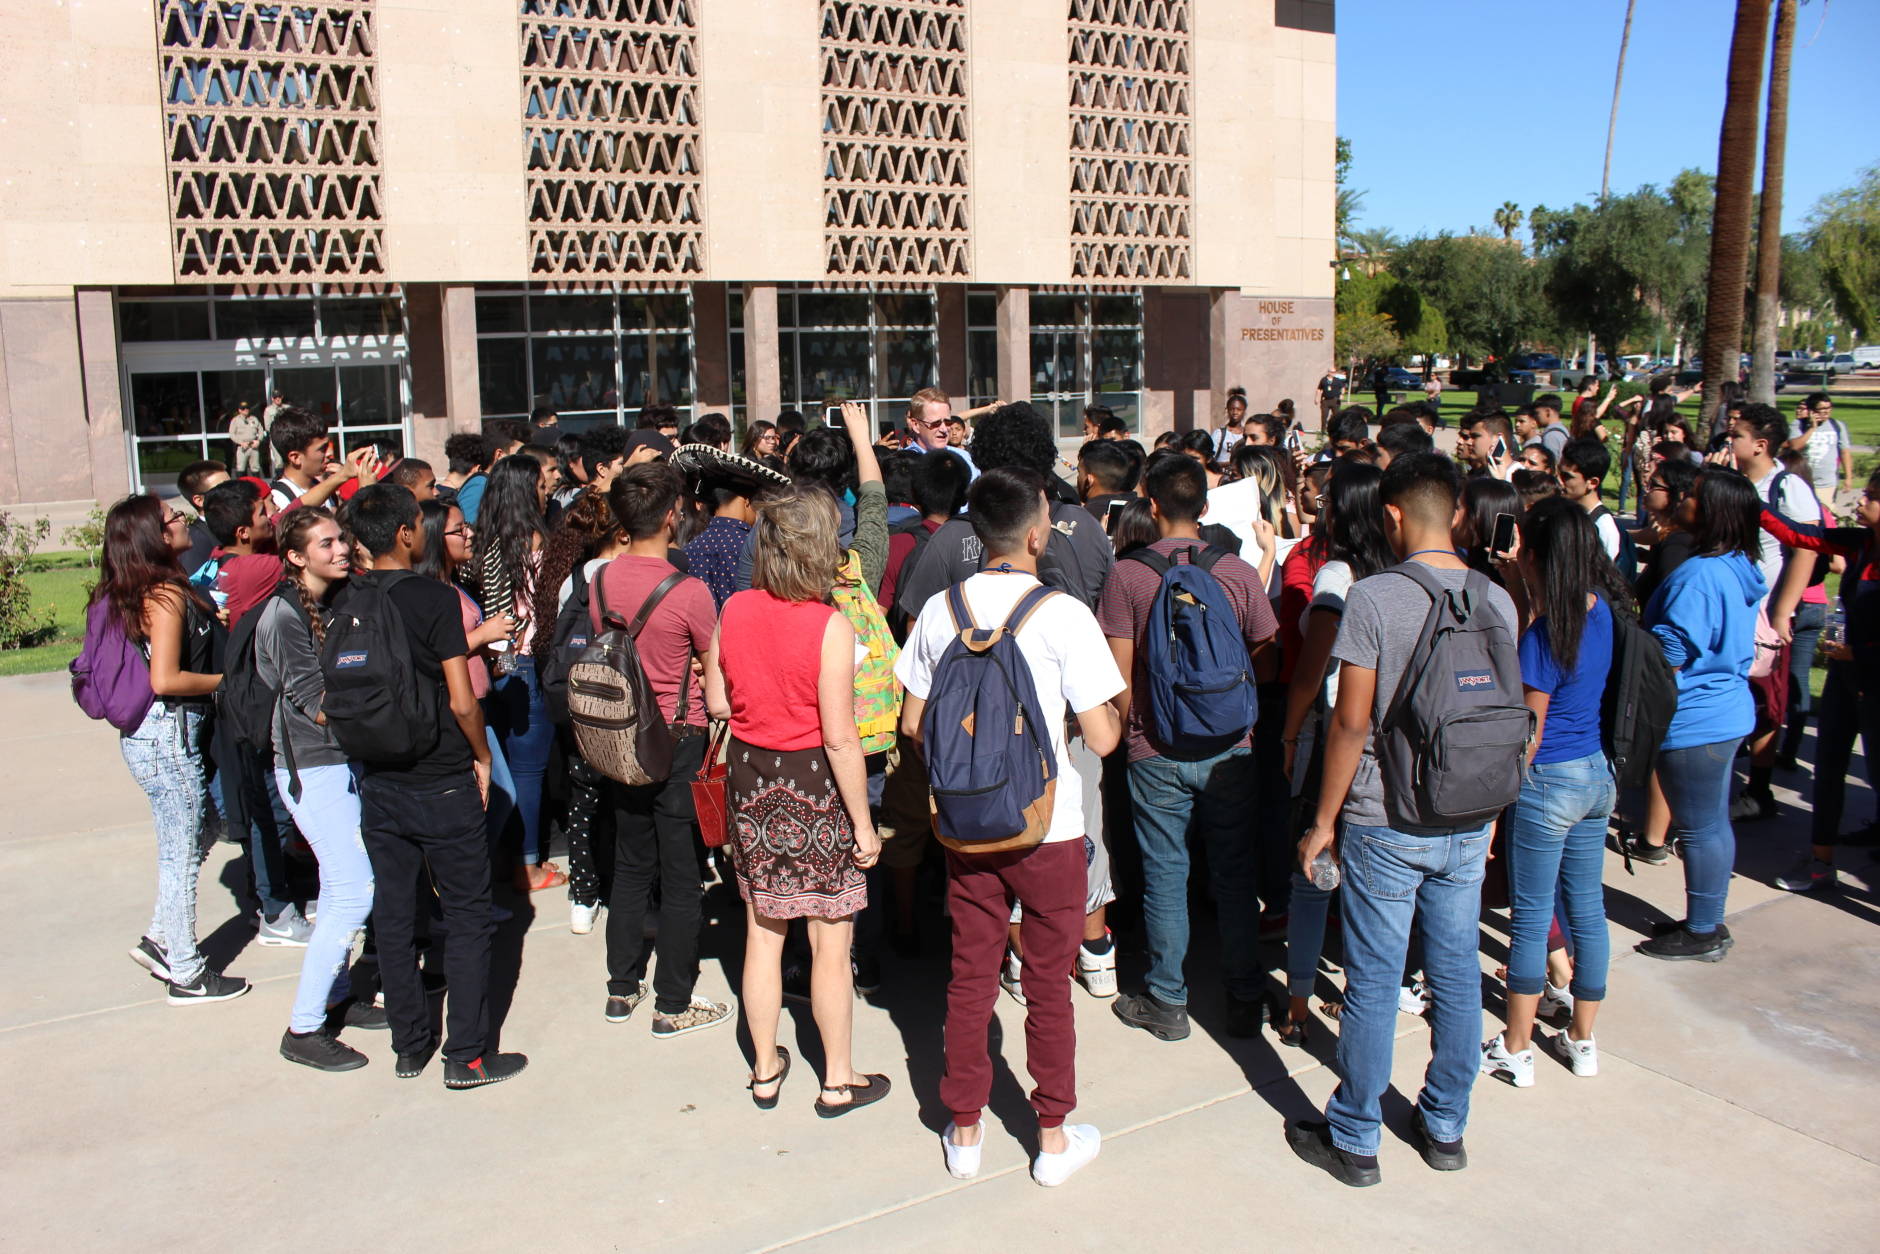 Arizona Department of Public Safety Capt. Ed Sharpensteen, center, speaks to high school students protesting Donald Trump's election at the state Capitol in Phoenix on Wednesday, Nov. 9, 2016. Students from several Phoenix high schools staged a walkout to protest Donald Trump's presidential victory. (AP Photo/Bob Christie)